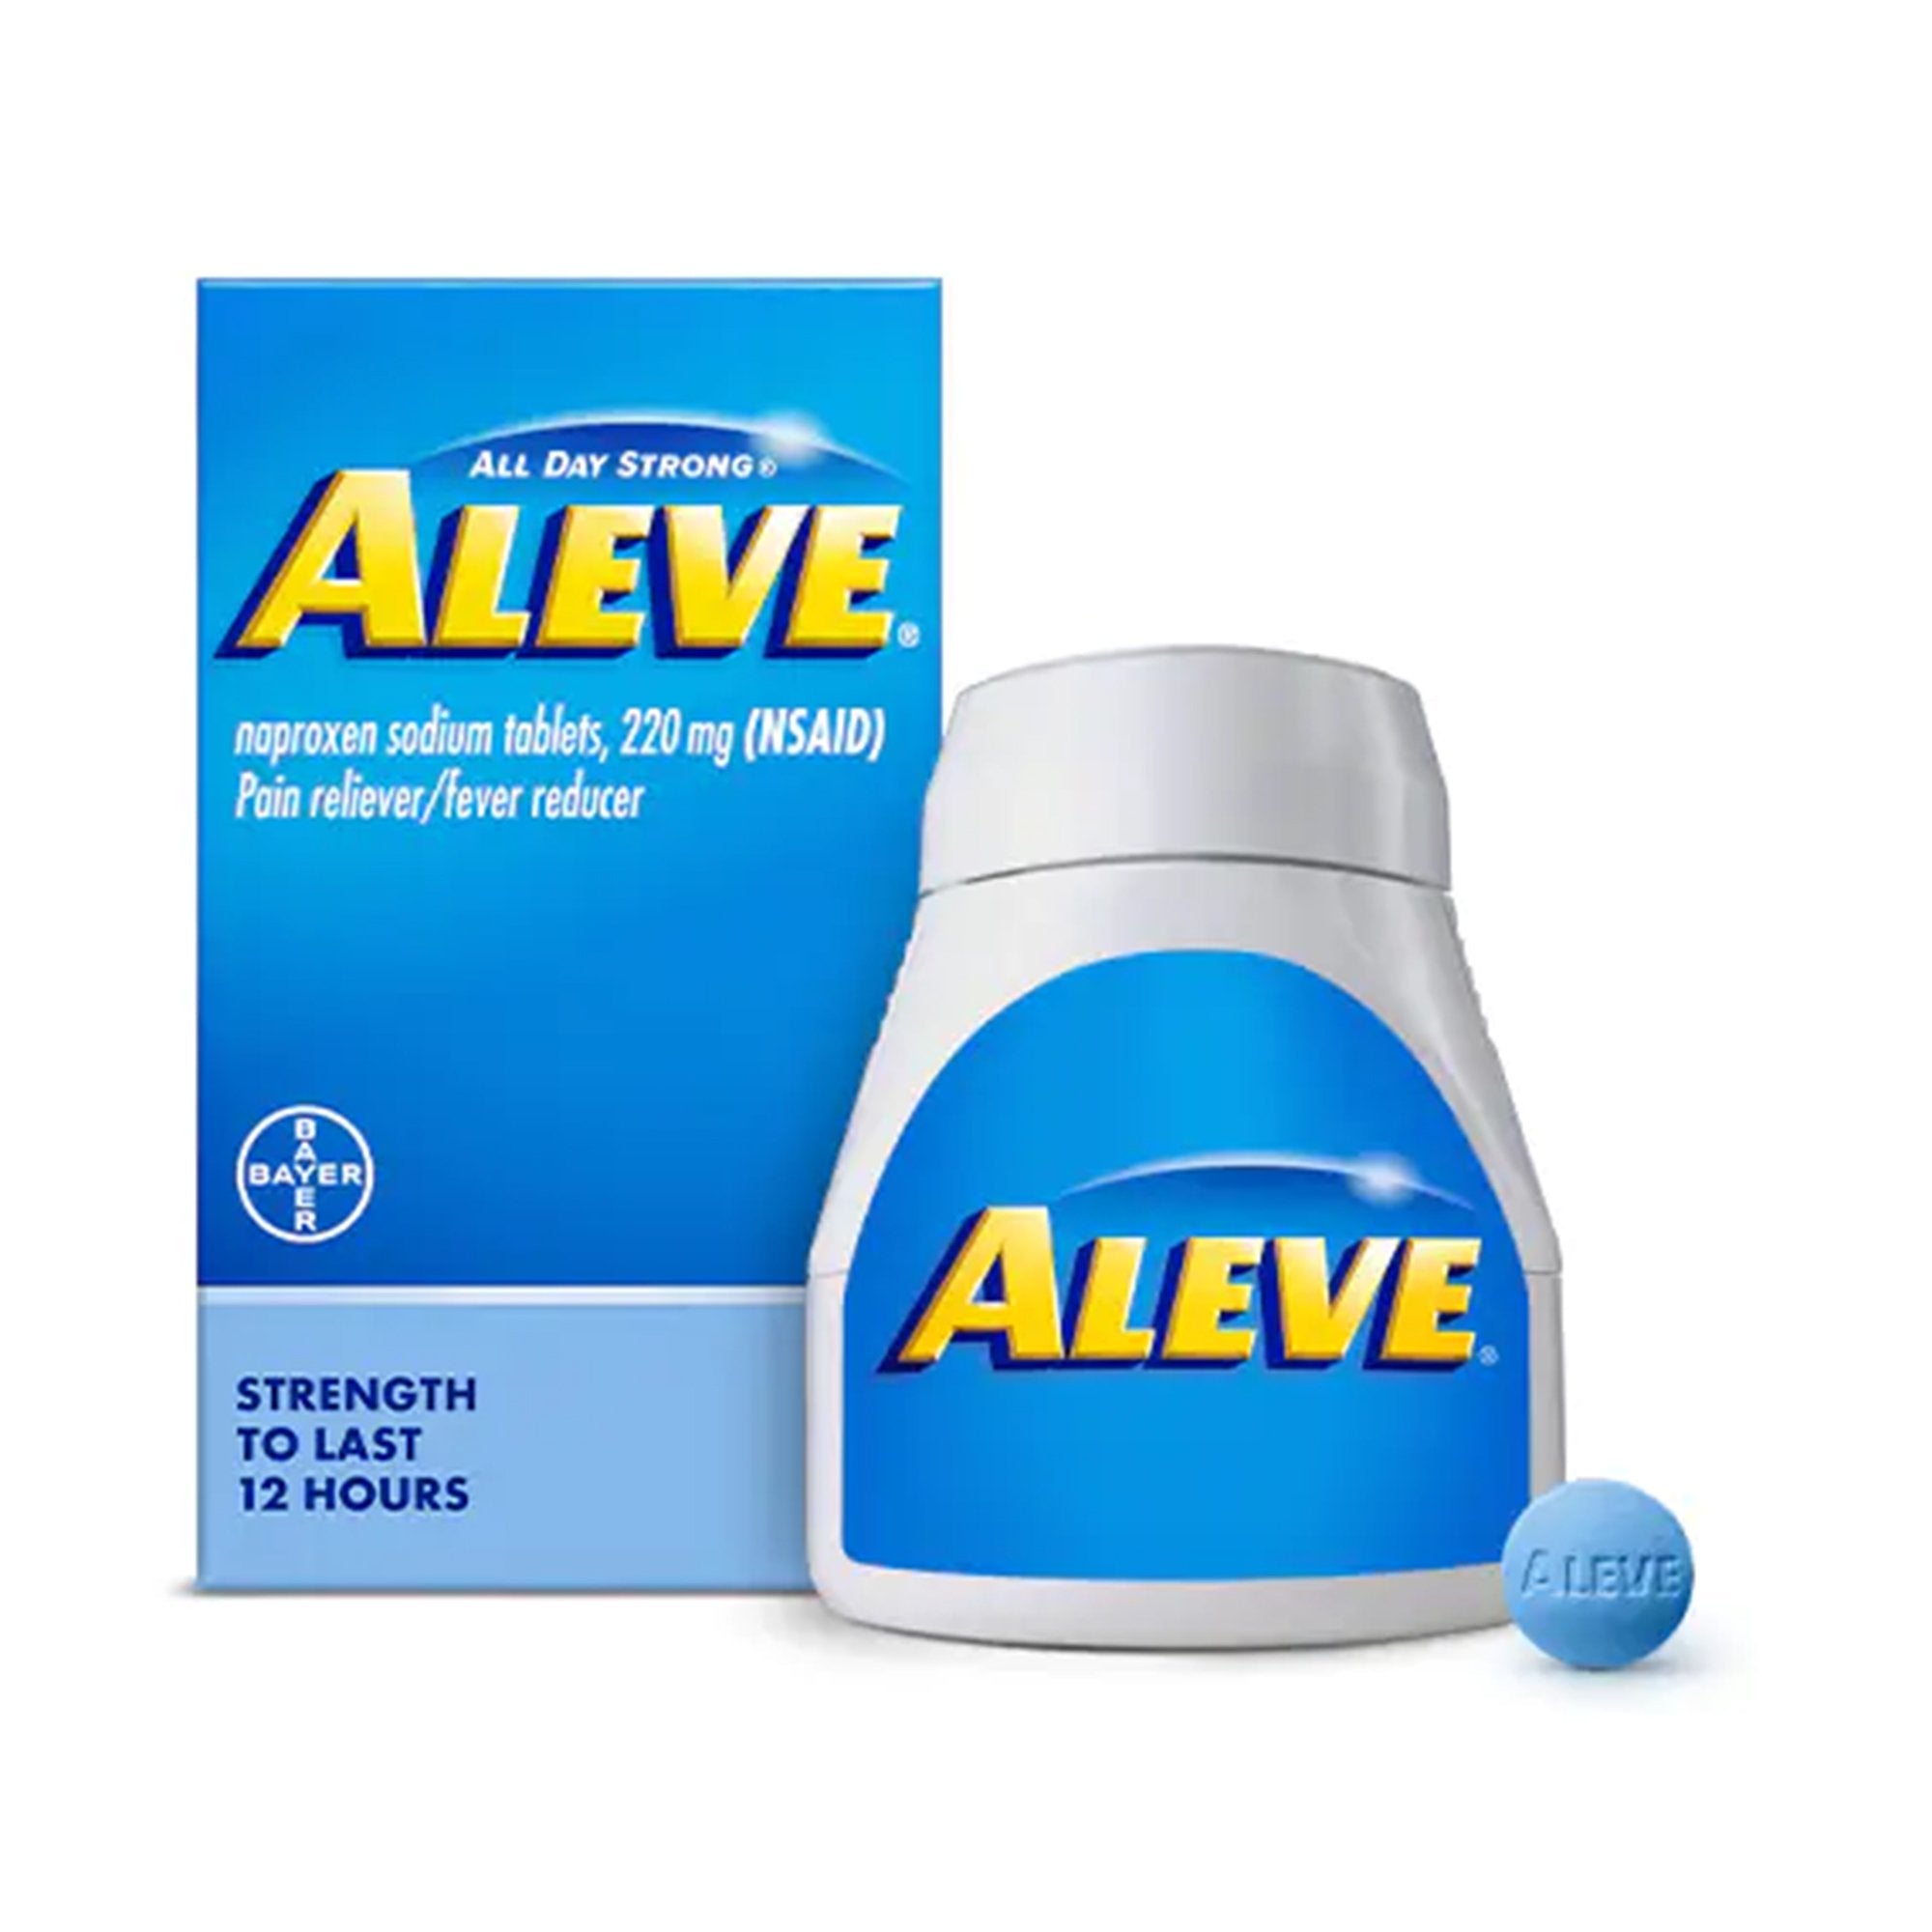 Pain Relief Aleve 220 mg Strength Naproxen Sodium Tablet 24 per Bottle